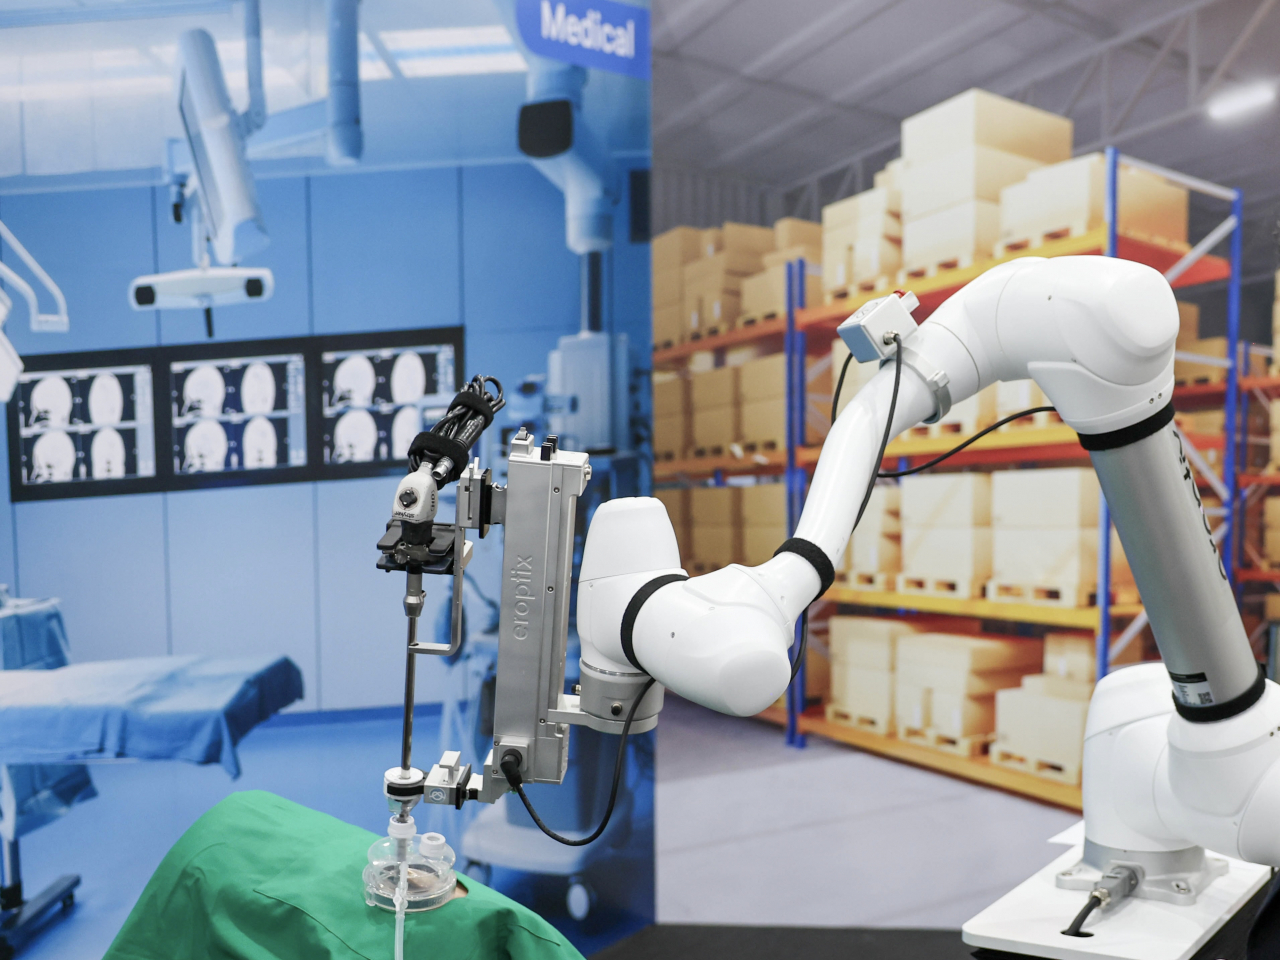 A laparoscopic surgical assistant cobot, a joint product of Doosan Robotics and medical equipment maker Erop, holds a camera-equipped instrument that can operate through small incisions, providing a clear view of the internal organs, reducing physical strain on surgeons. (Doosan Robotics)